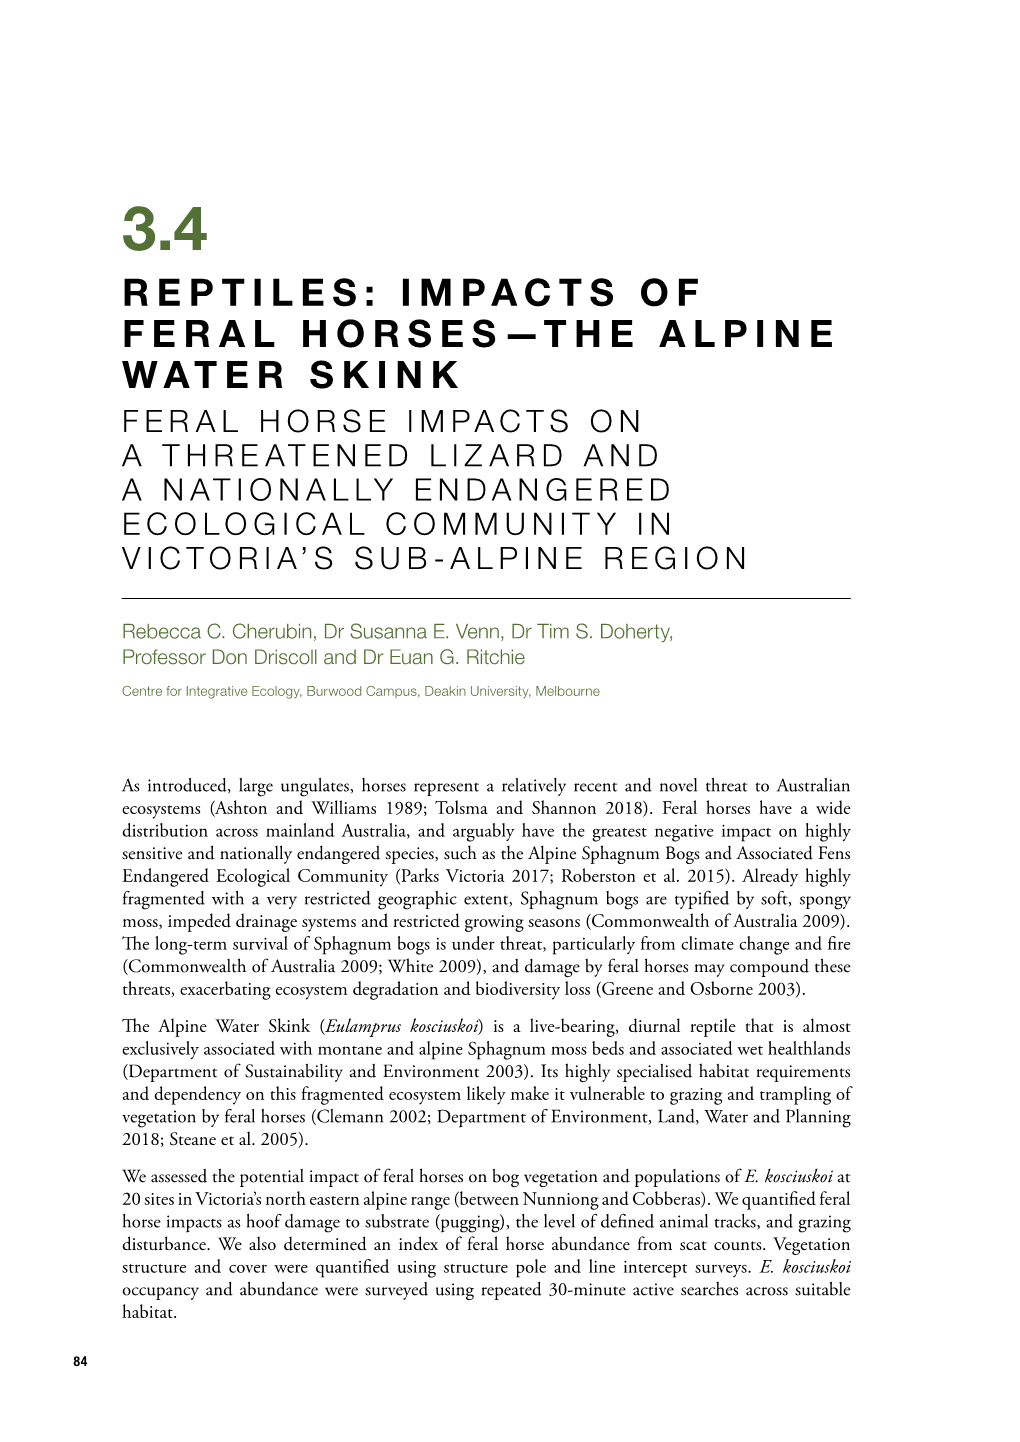 Impacts of Feral Horses—The Alpine Water Skink